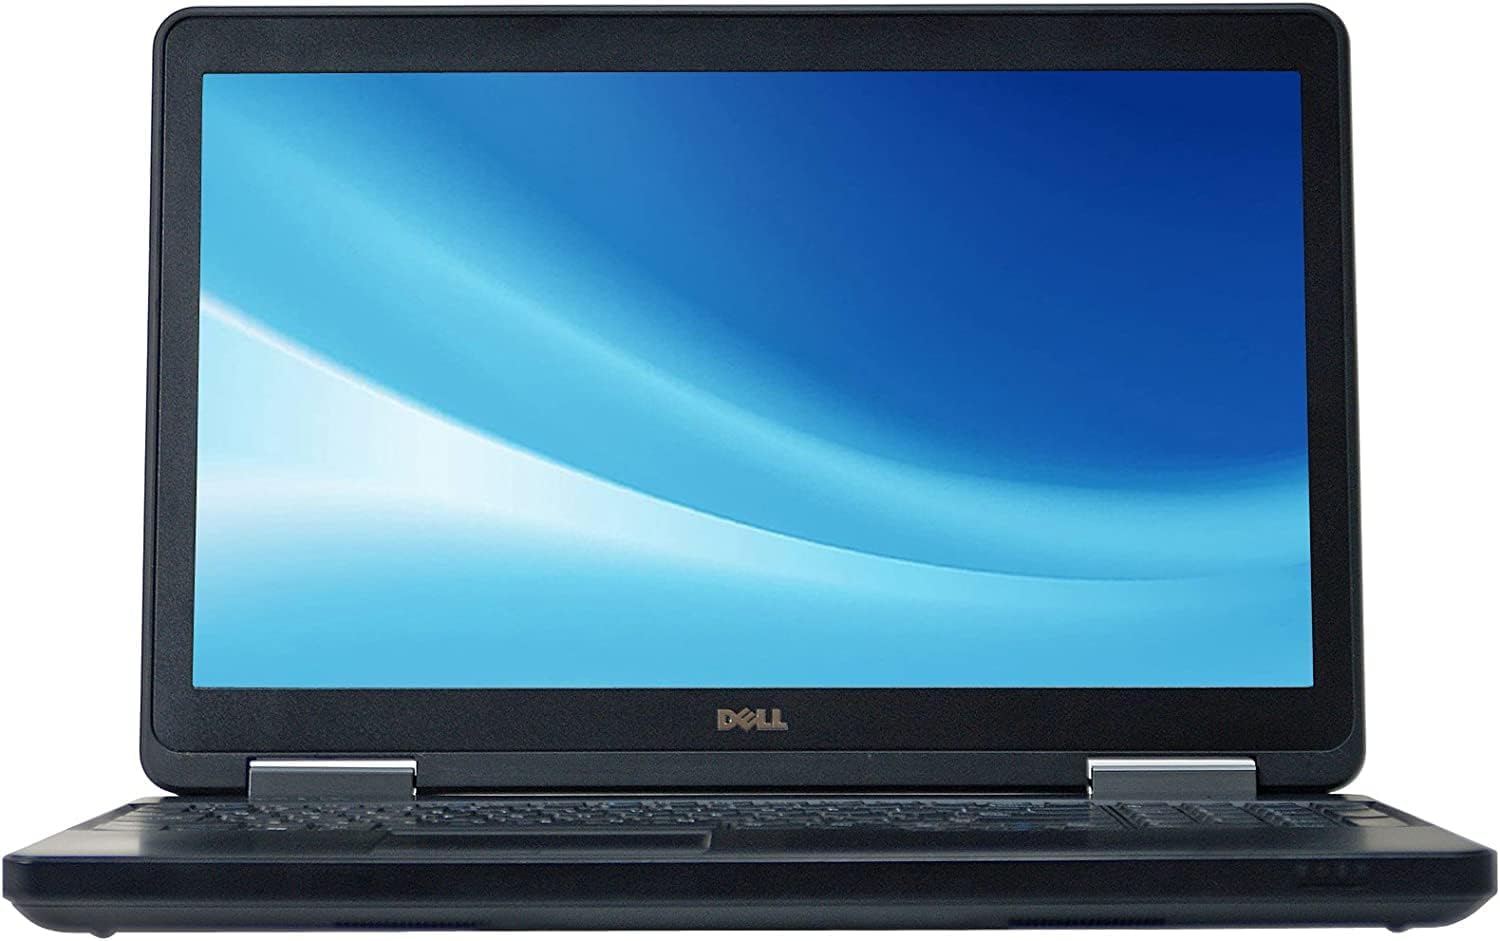 Refurbished Dell Latitude E5540 Laptop Computer, Intel Core i5, 16GB Ram, 128GB Solid State Drive, Windows 11 Operating System, 1 Year Warranty